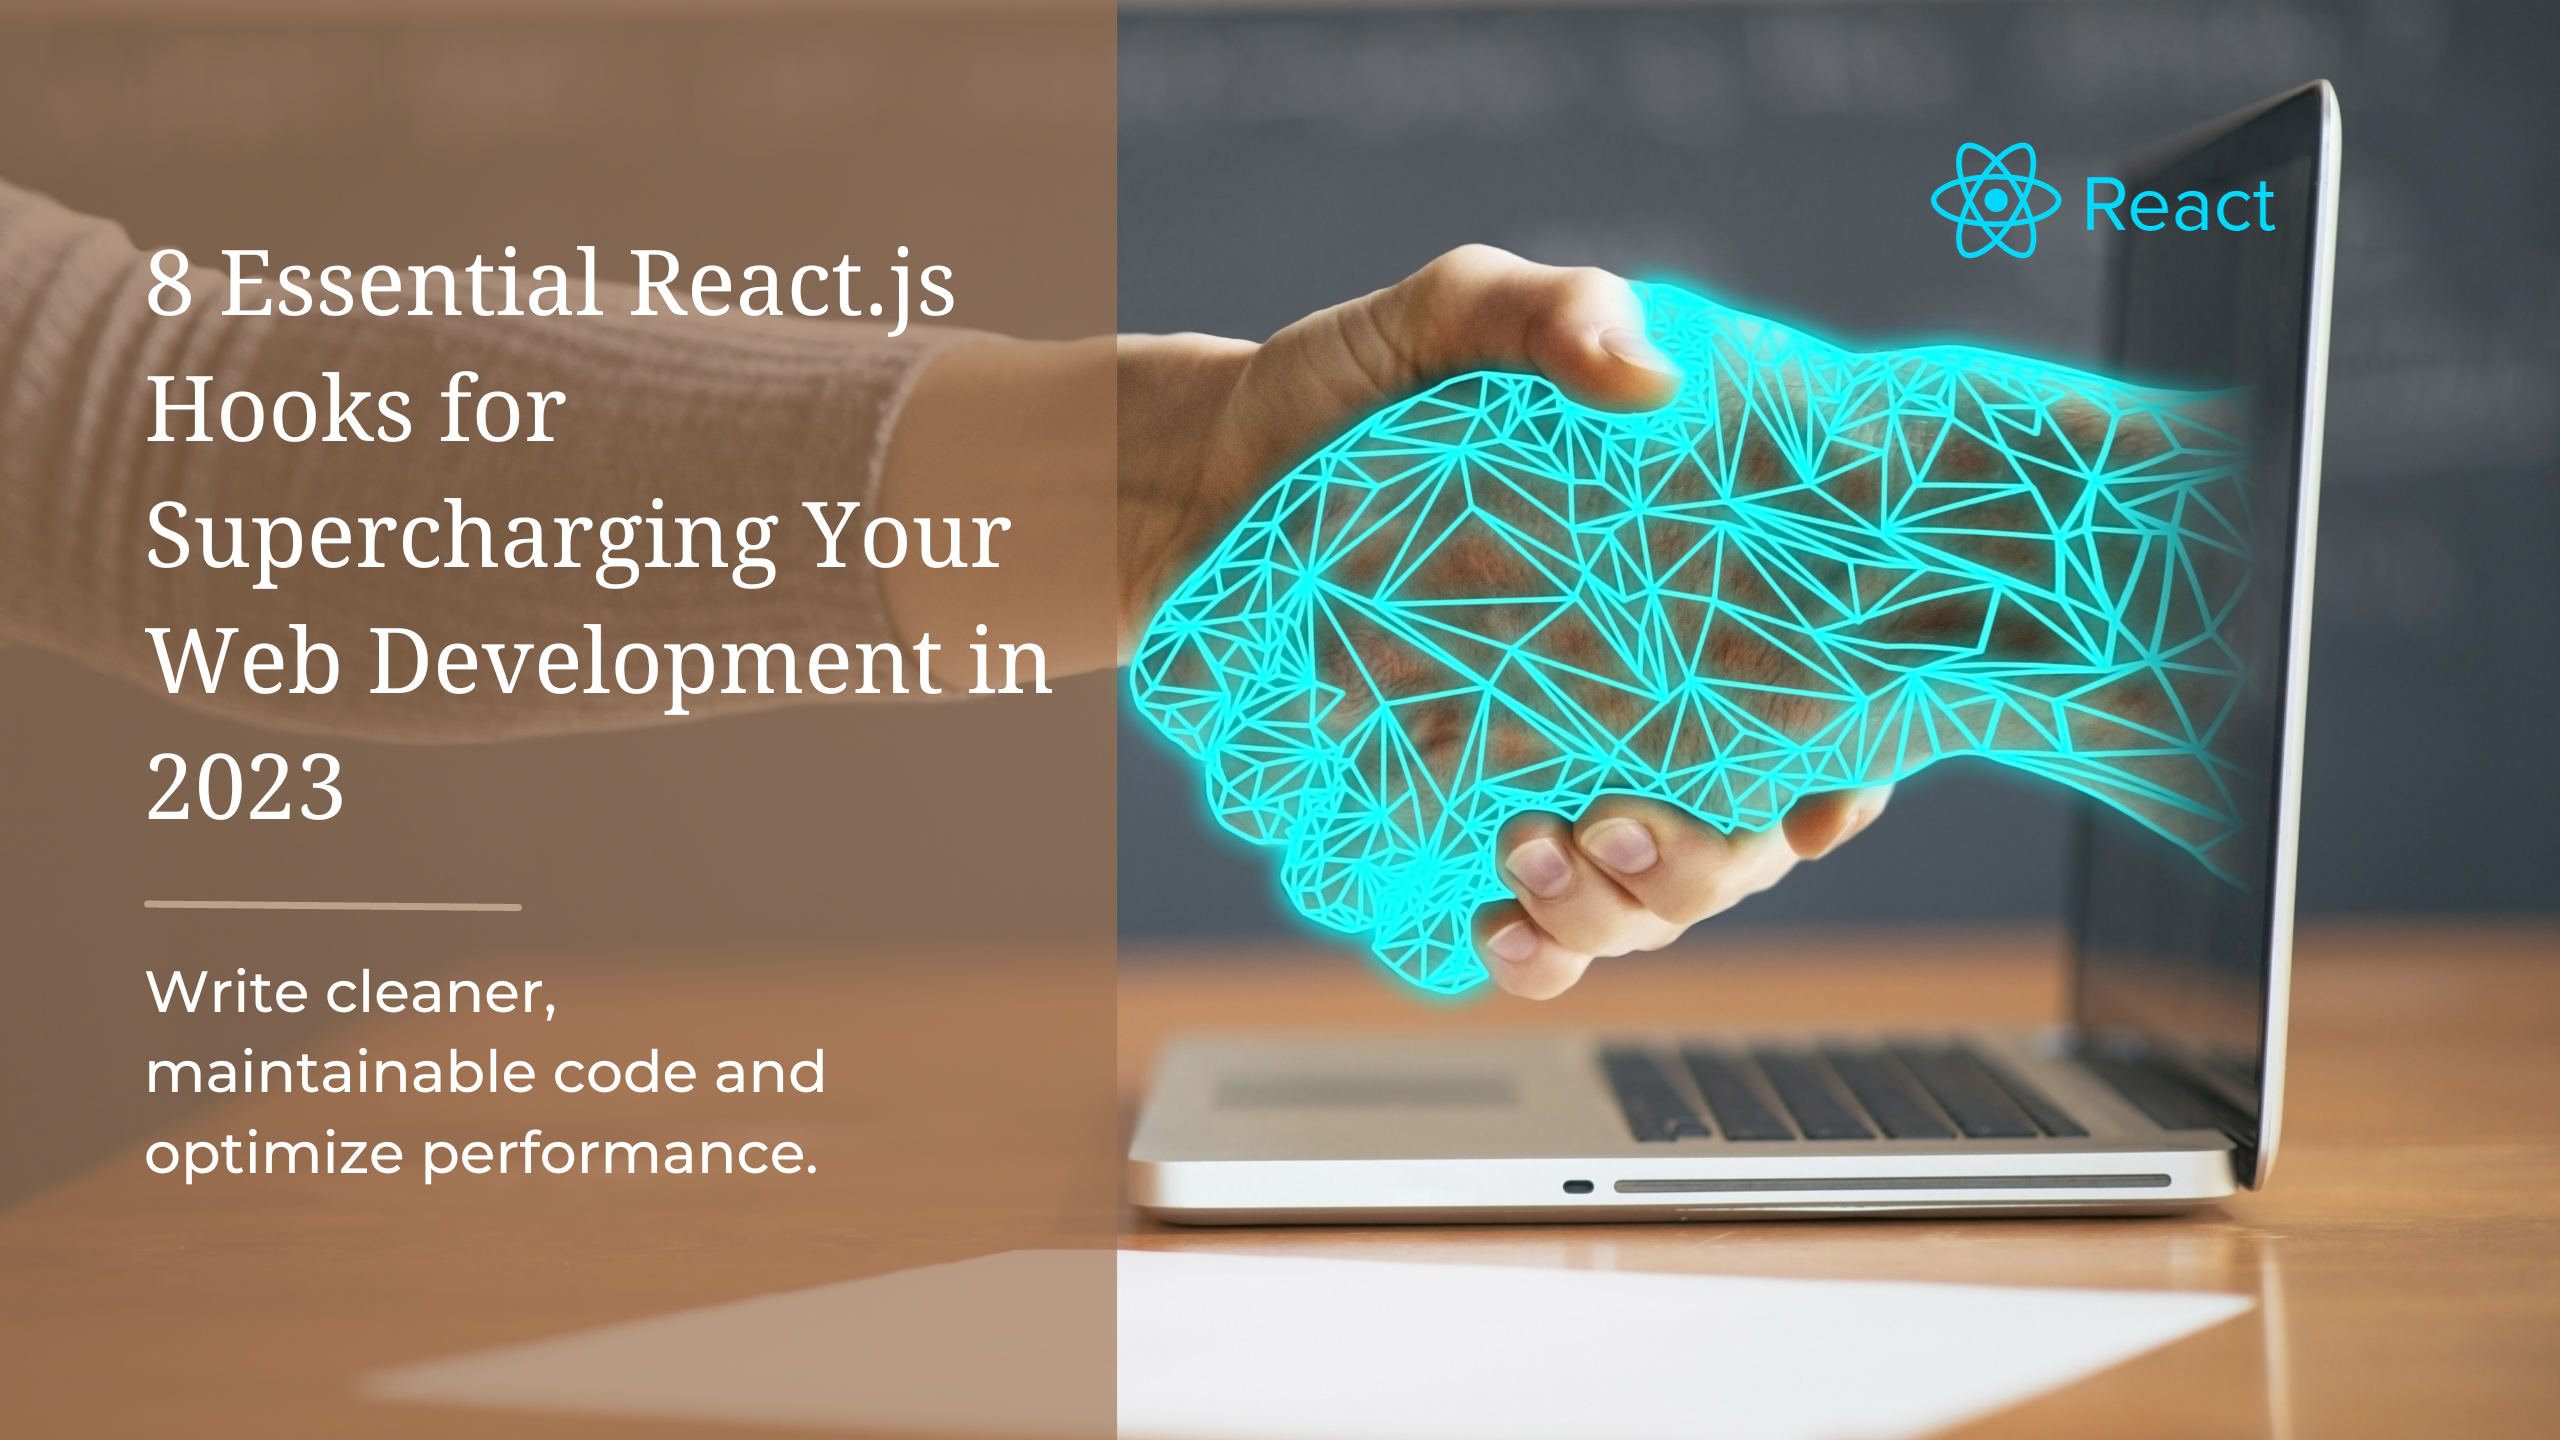 8 Essential React.js Hooks for Supercharging Your Web Development in 2023